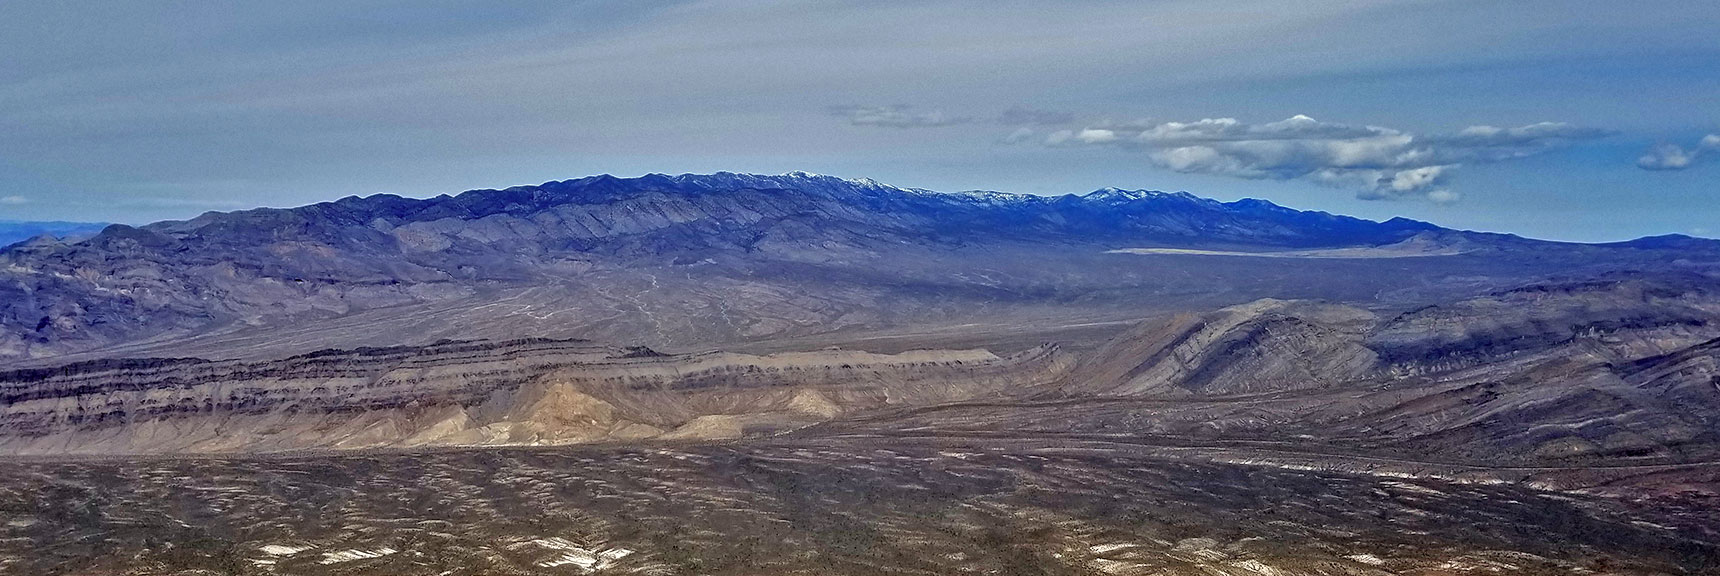 View of the Sheep Range from Gass Peak Eastern Summit | Gass Peak Eastern Summit Ultra-marathon Adventure, Nevada